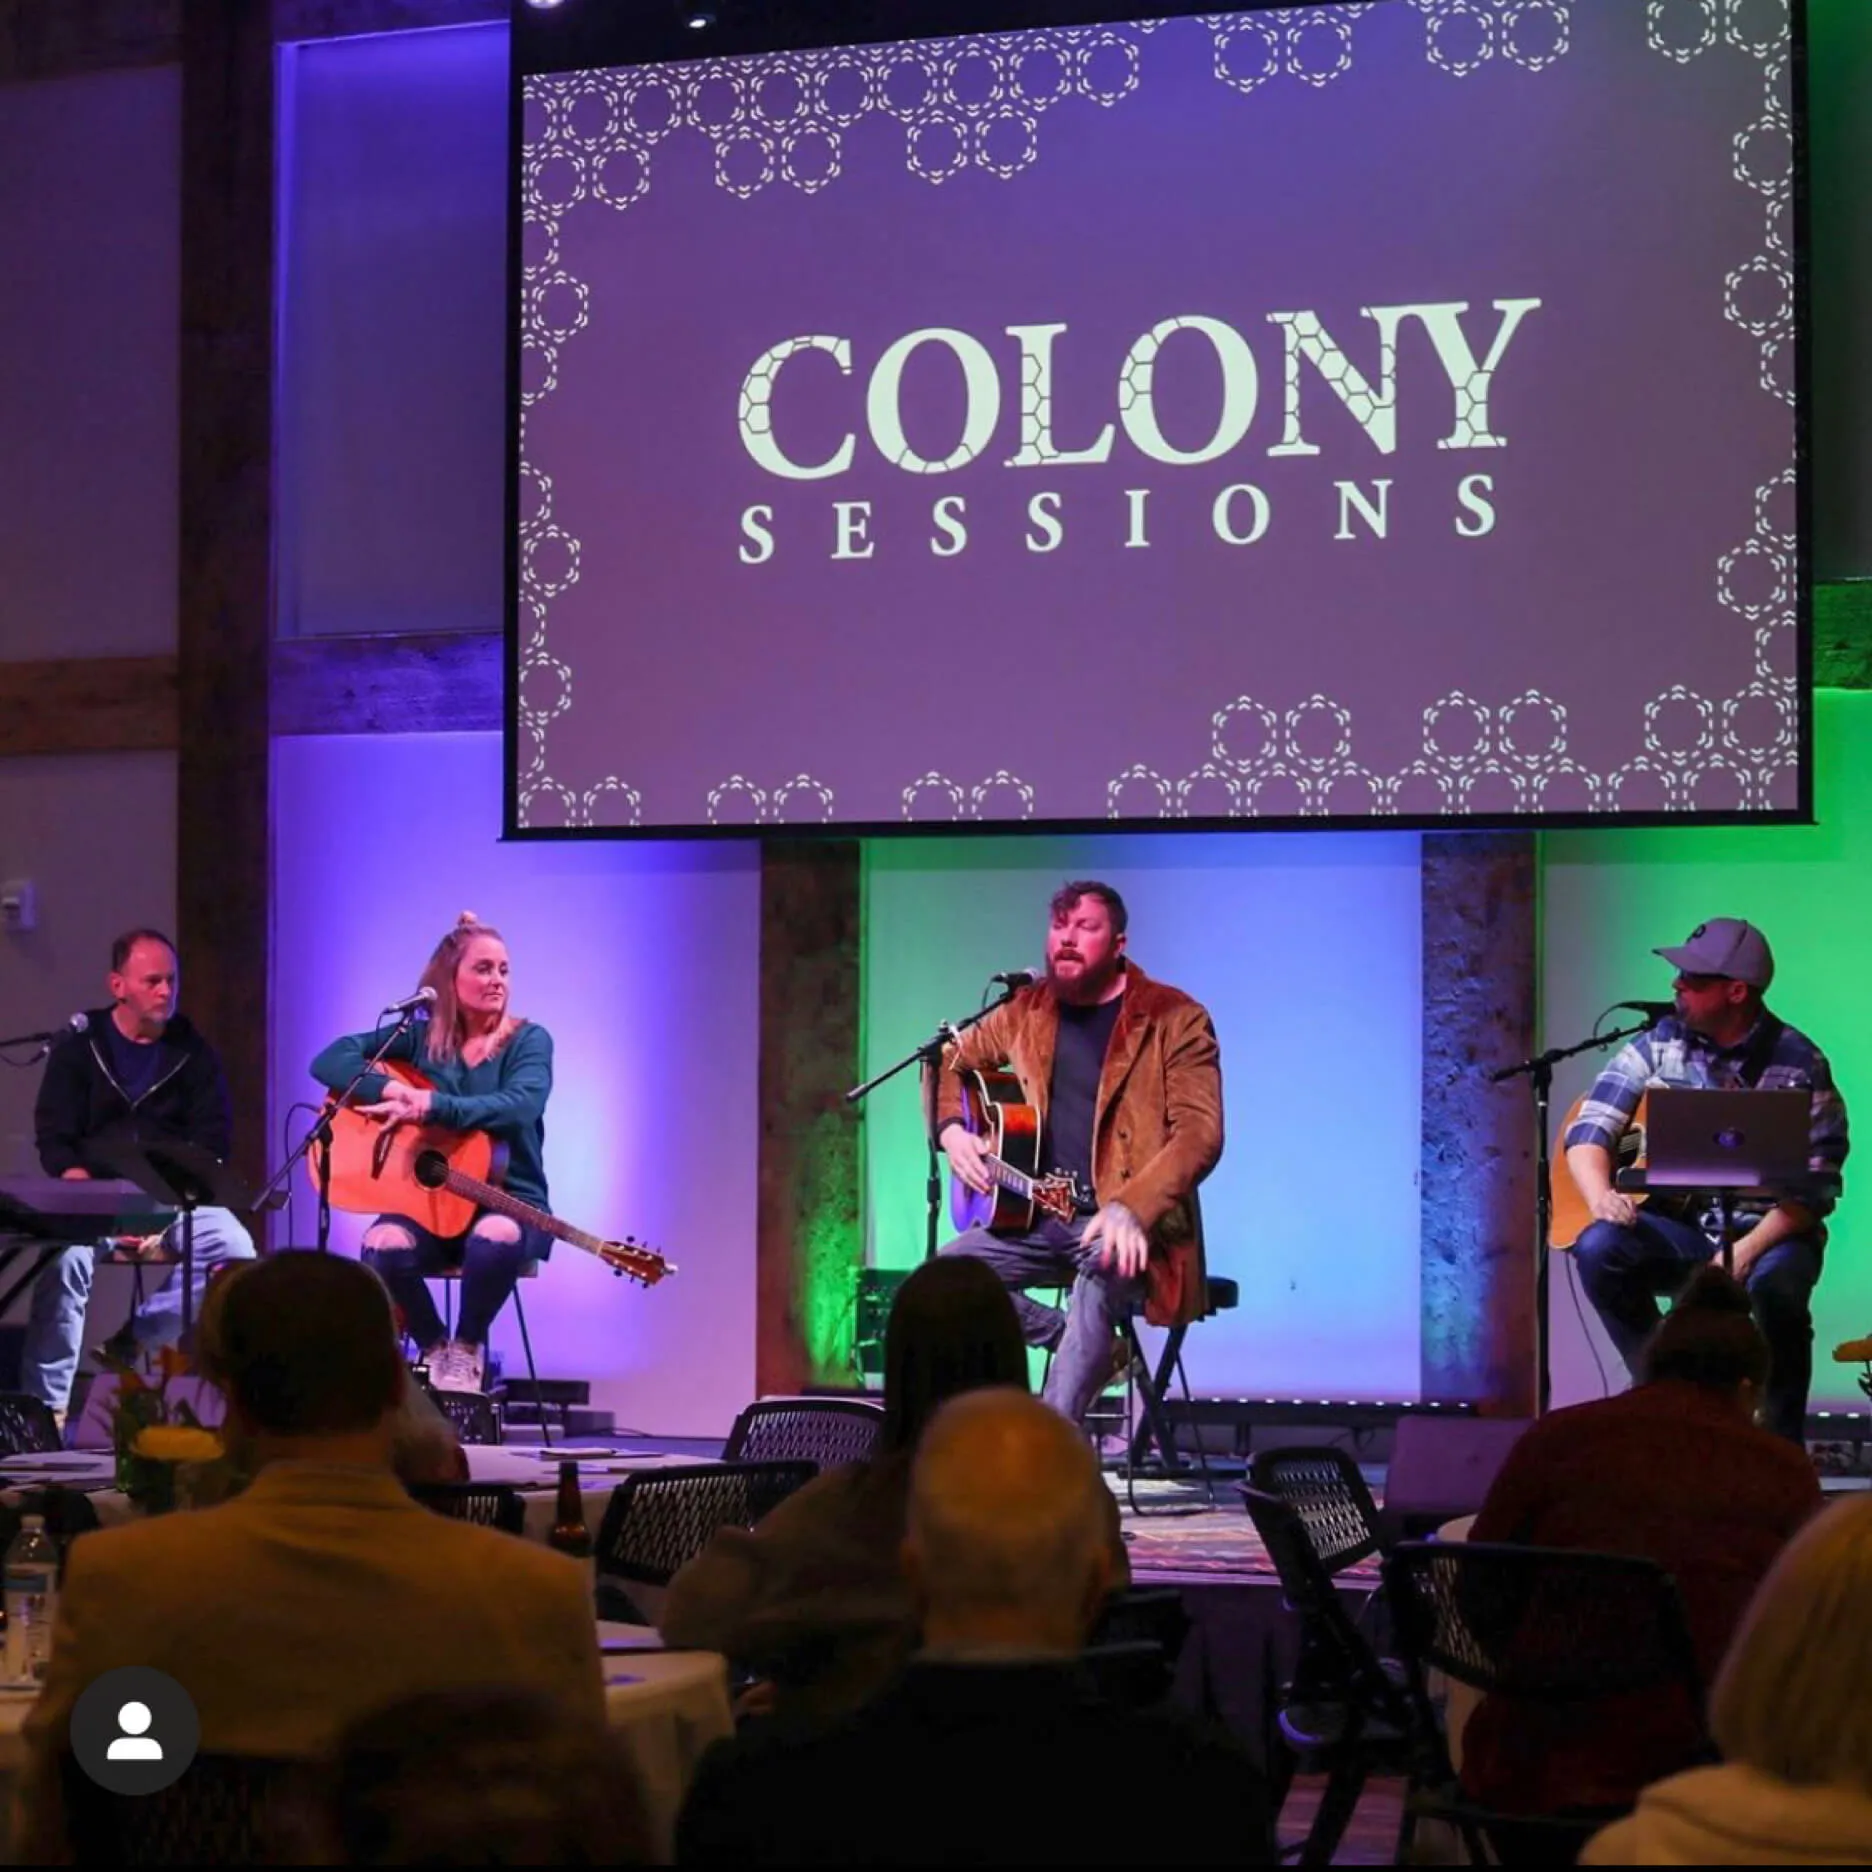 COLONY SESSIONS - with Molly Reed, Ben Fuller and Benji Cowart